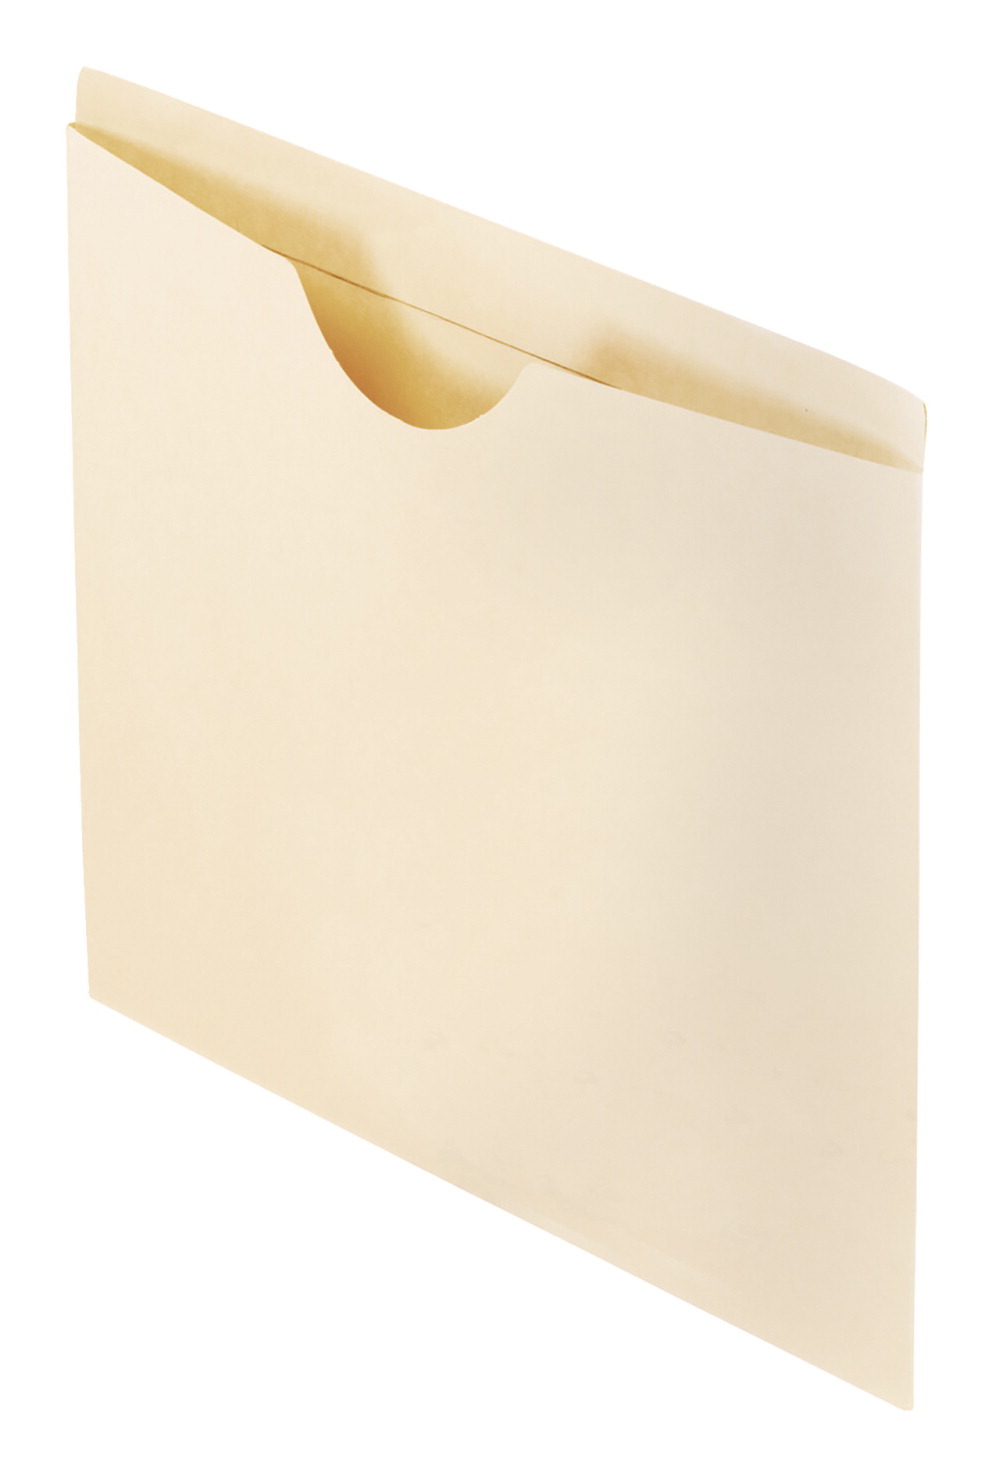 Paper - Manila Anti-mold And Mildew Flat Reinforced File Jacket, Pack 100